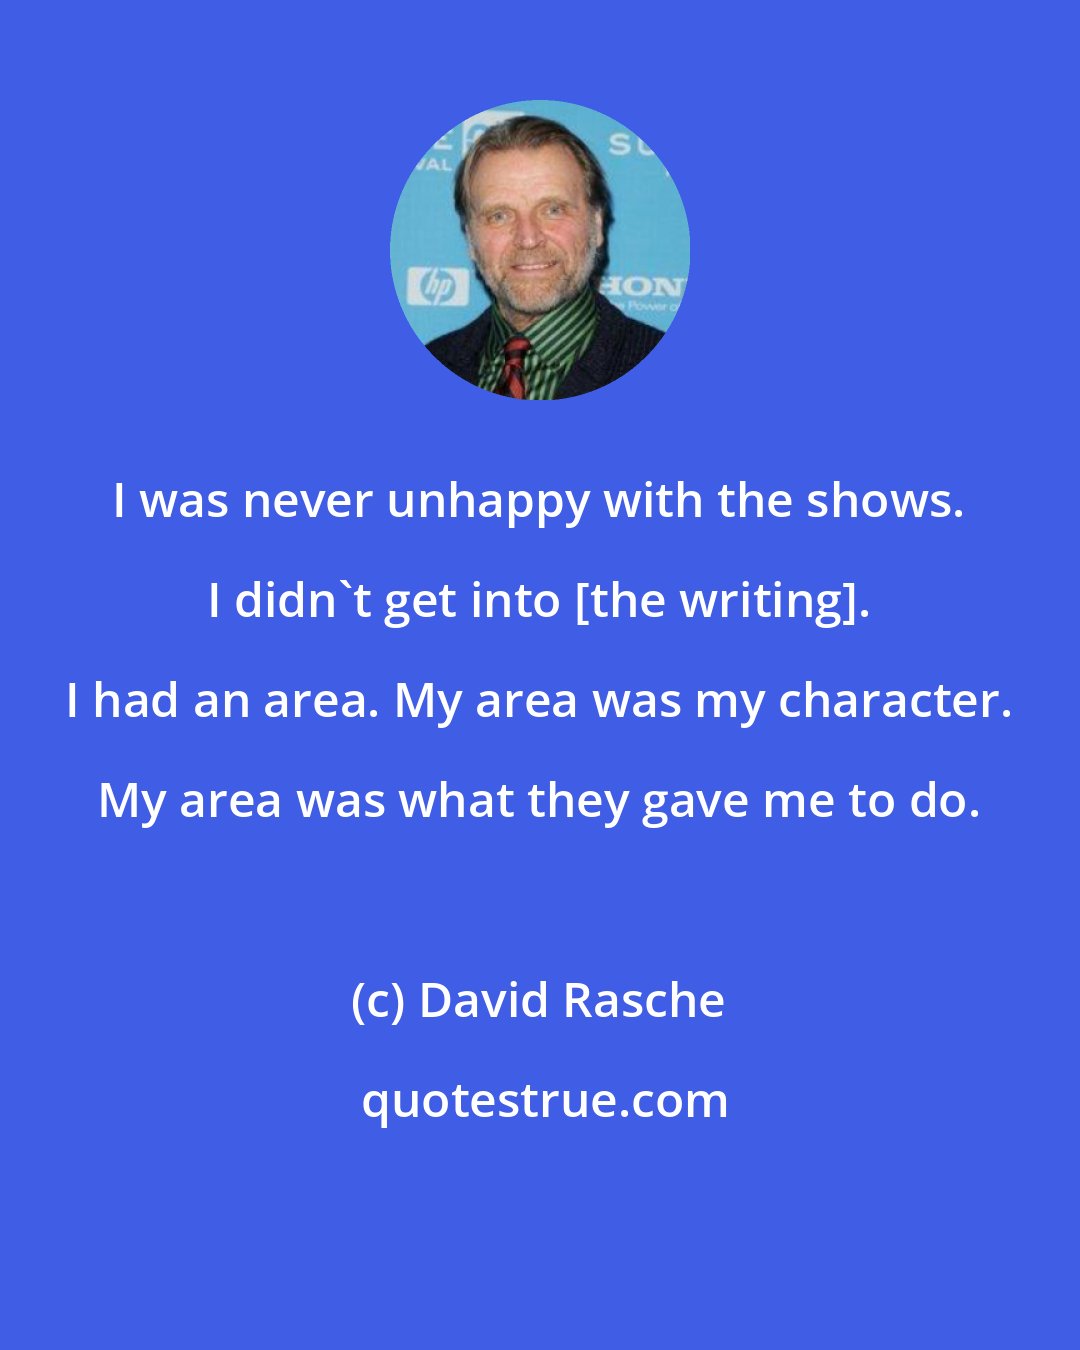 David Rasche: I was never unhappy with the shows. I didn't get into [the writing]. I had an area. My area was my character. My area was what they gave me to do.